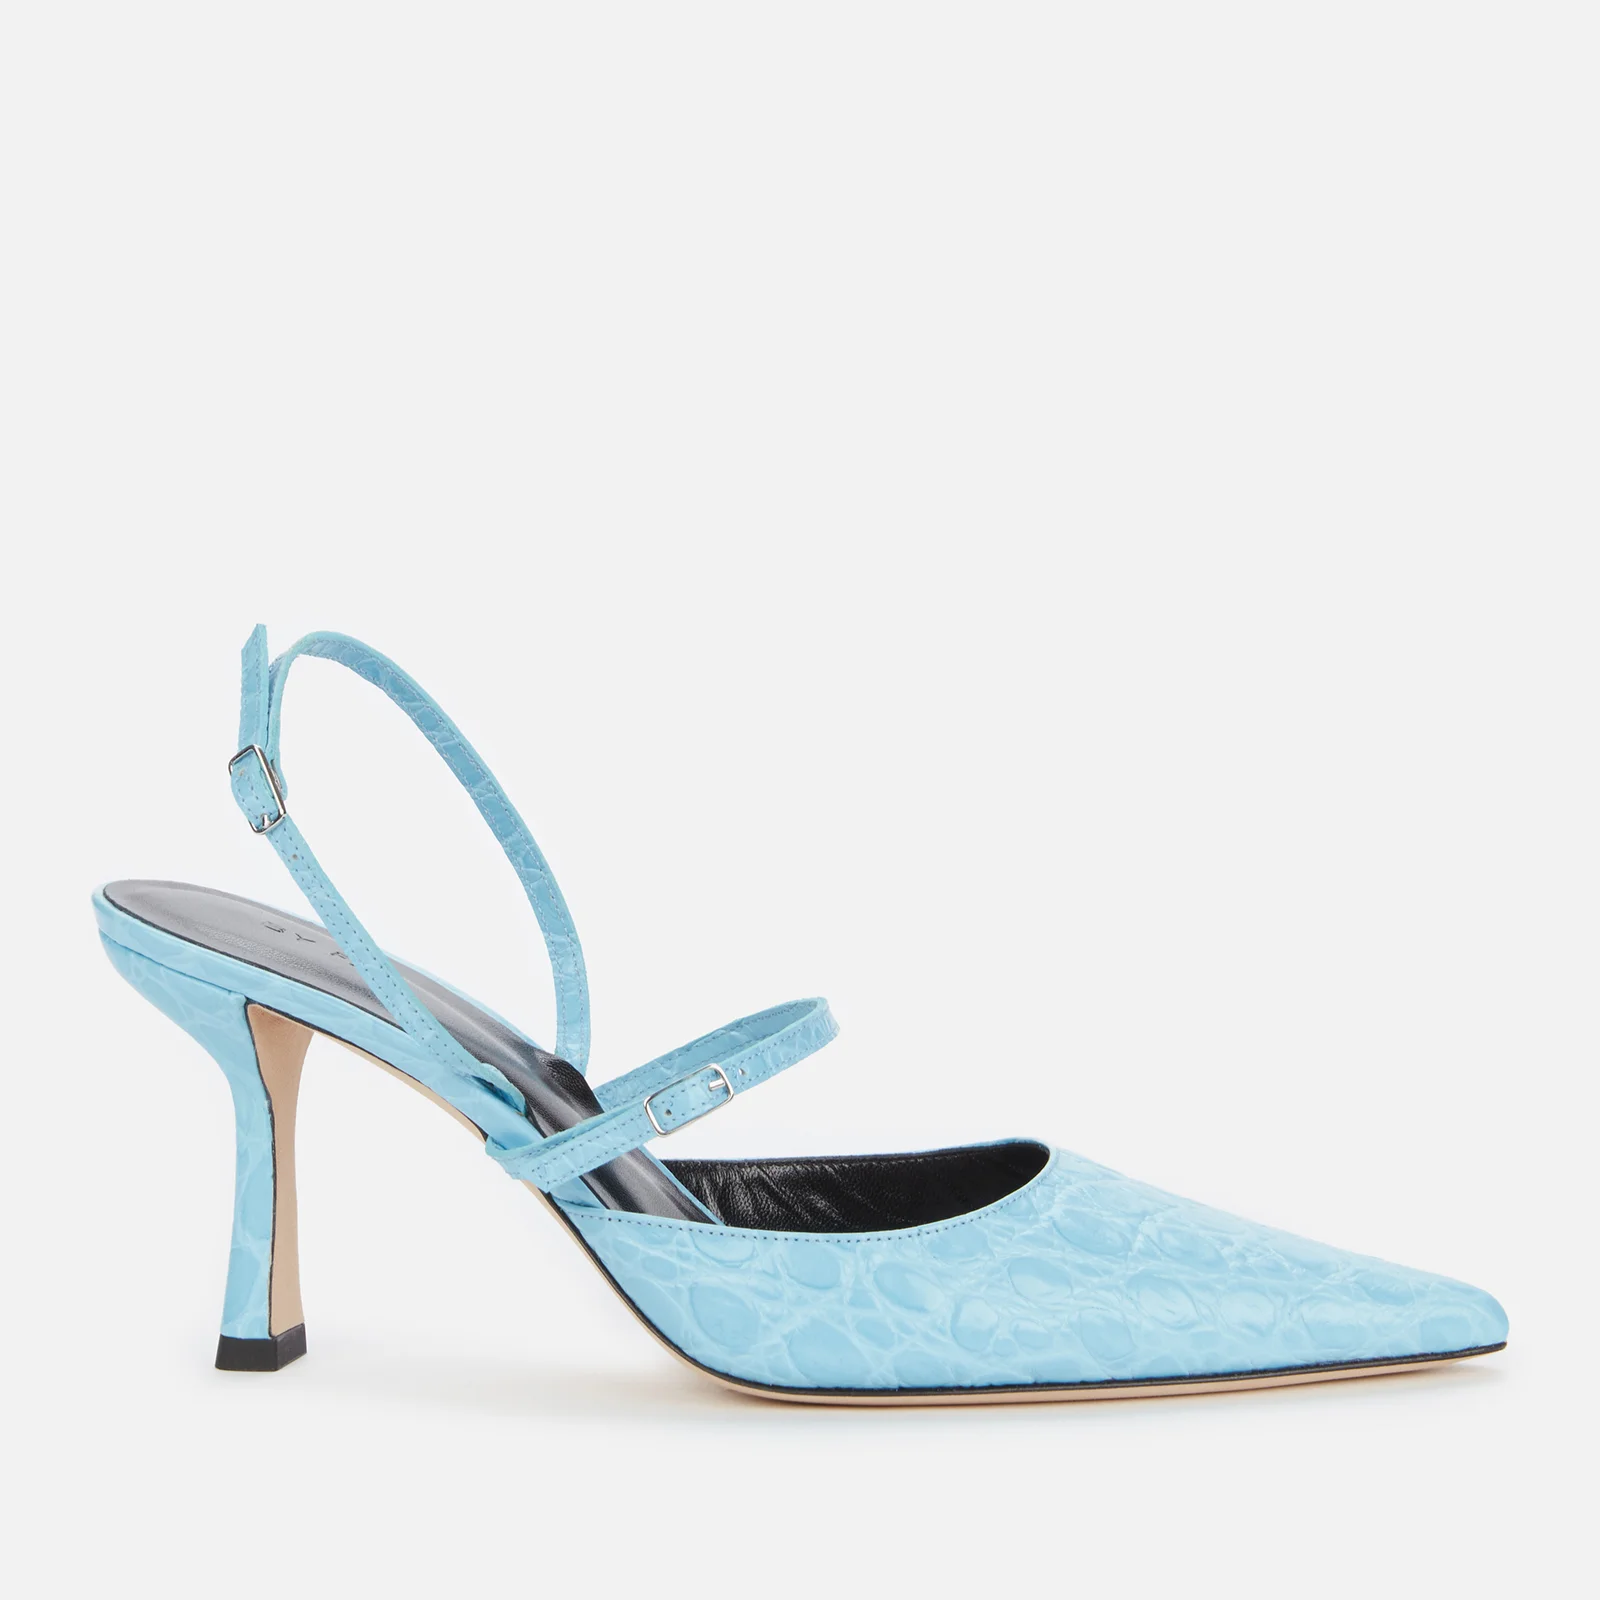 BY FAR Women's Tiffany Embossed Leather Court Shoes - Lagoon Image 1